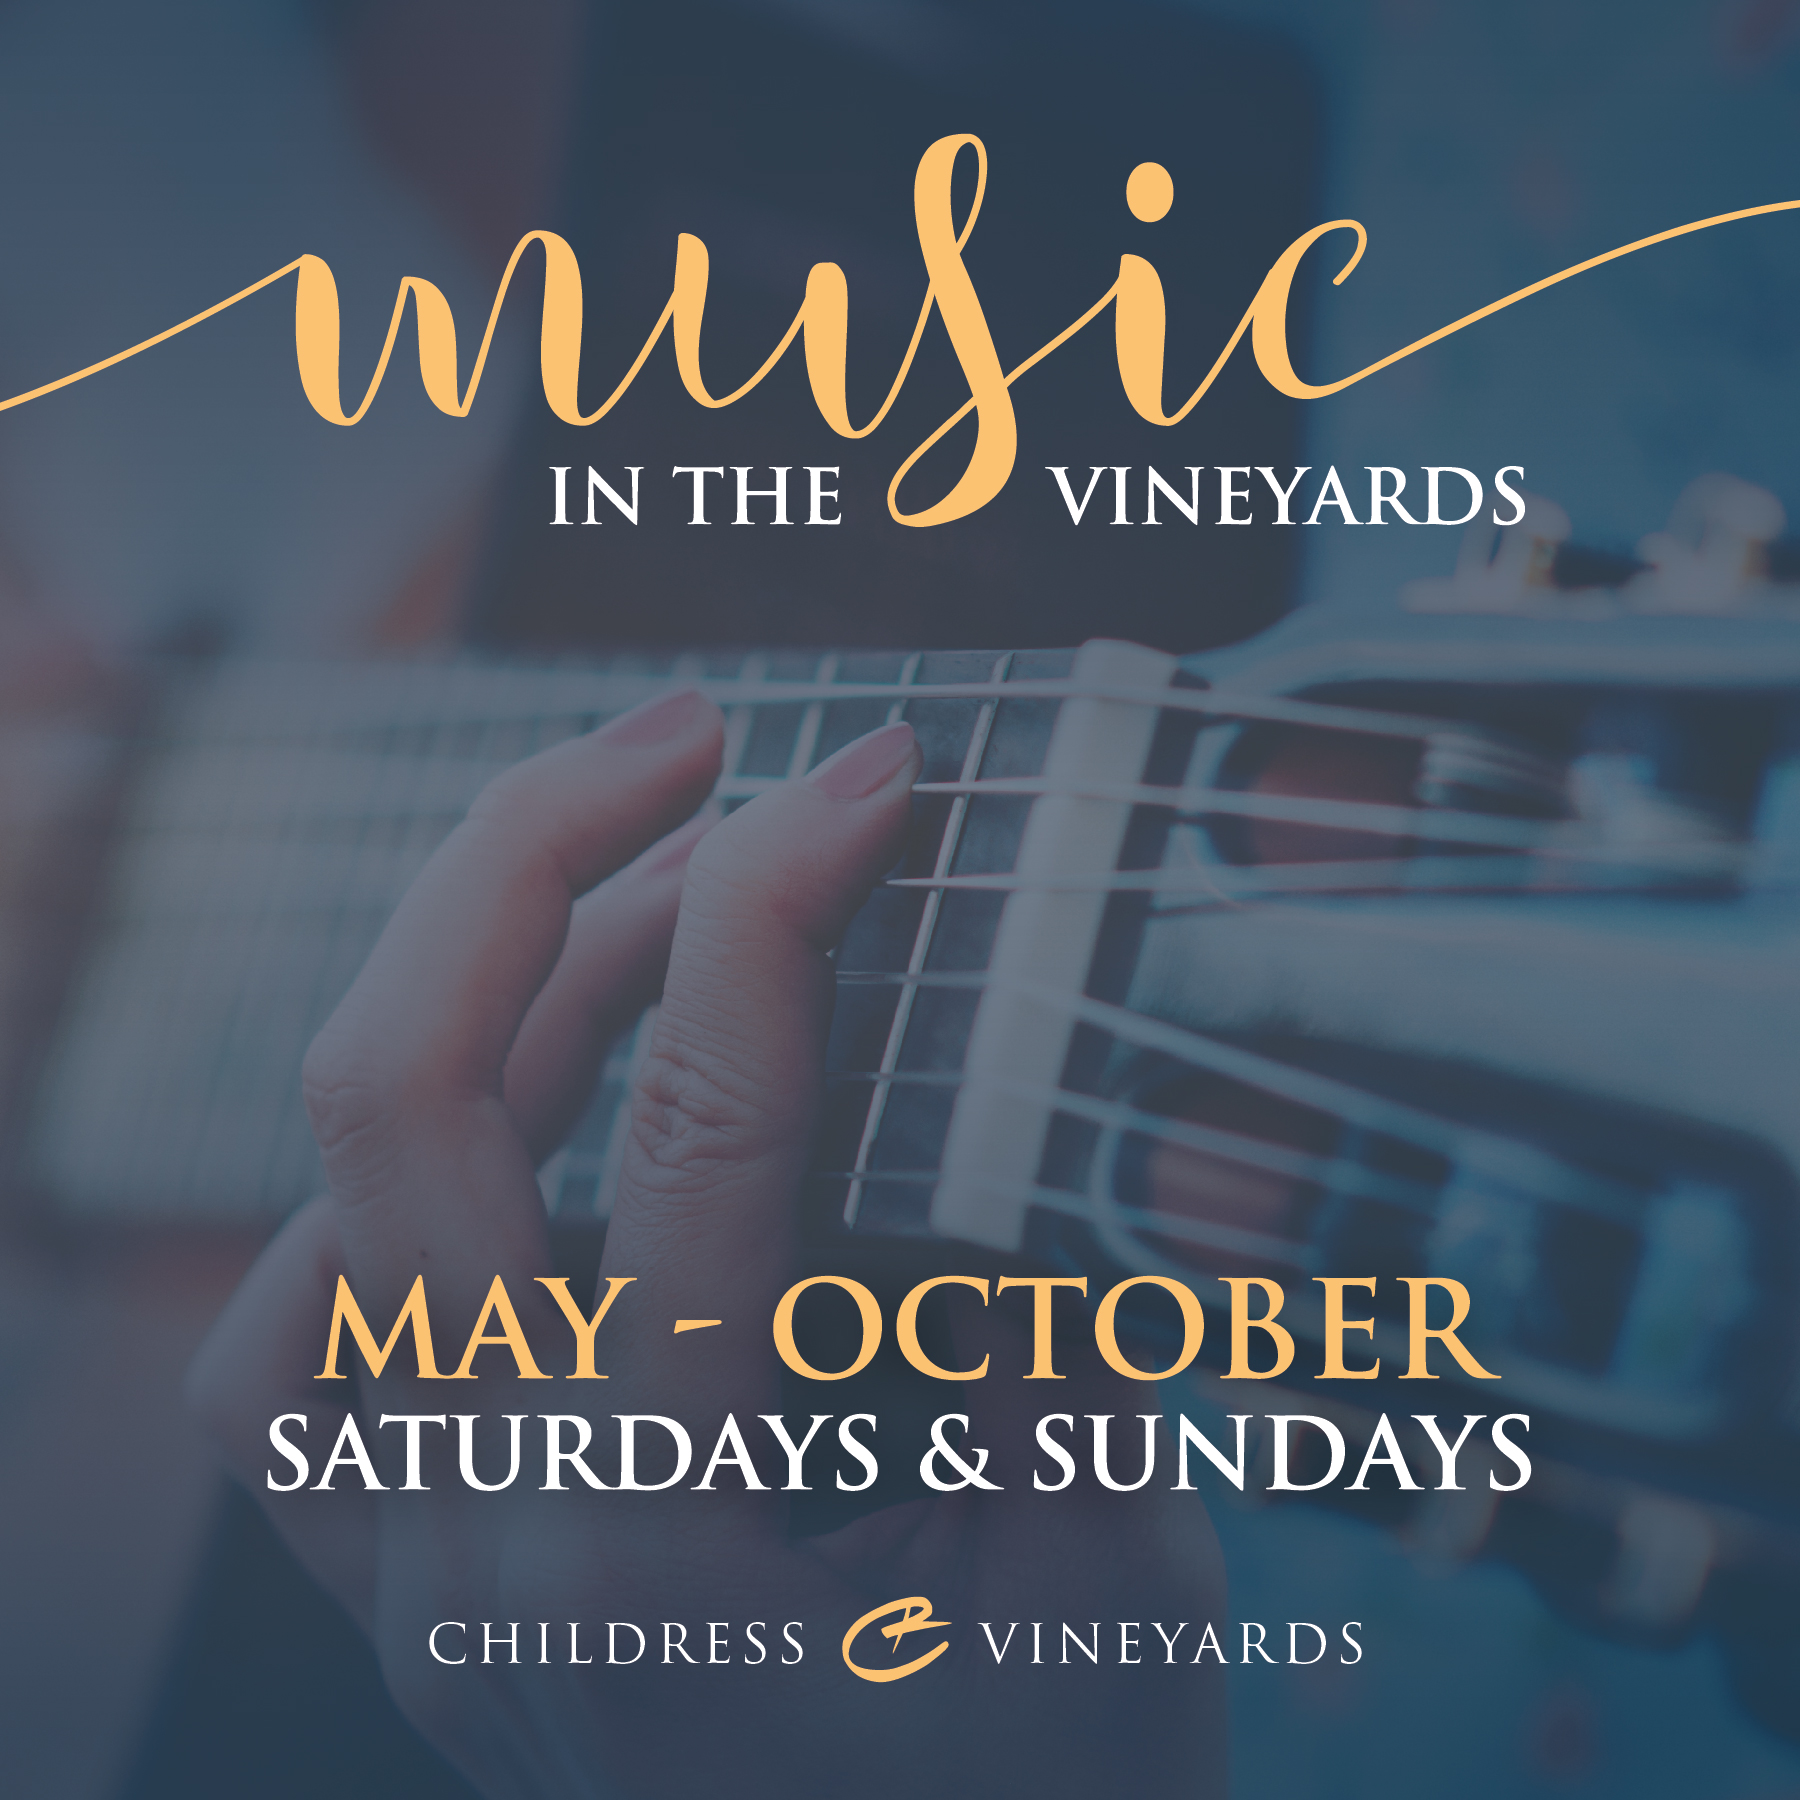 Childress Vineyards and Winery Live Music in the Vineyards Event